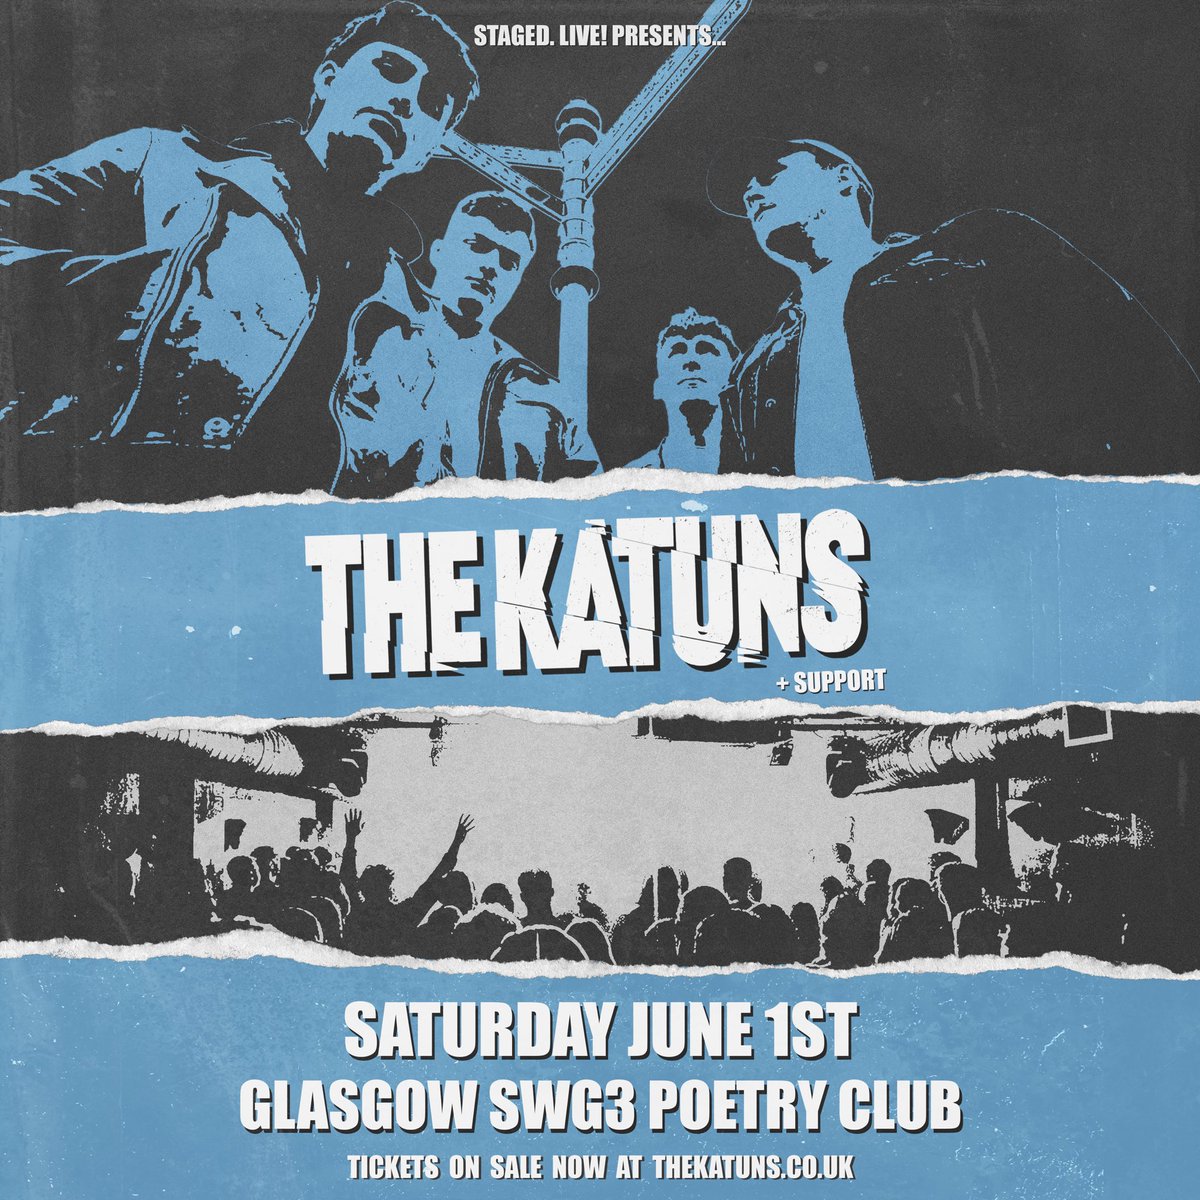 🚨TICKETS ON SALE NOW!🚨 Get your tickets now for our headline show at @swg3glasgow on Saturday June 1st! 🏴󠁧󠁢󠁳󠁣󠁴󠁿🔥 Ticket link here: tikt.link/katuns See you down the front! 🤘